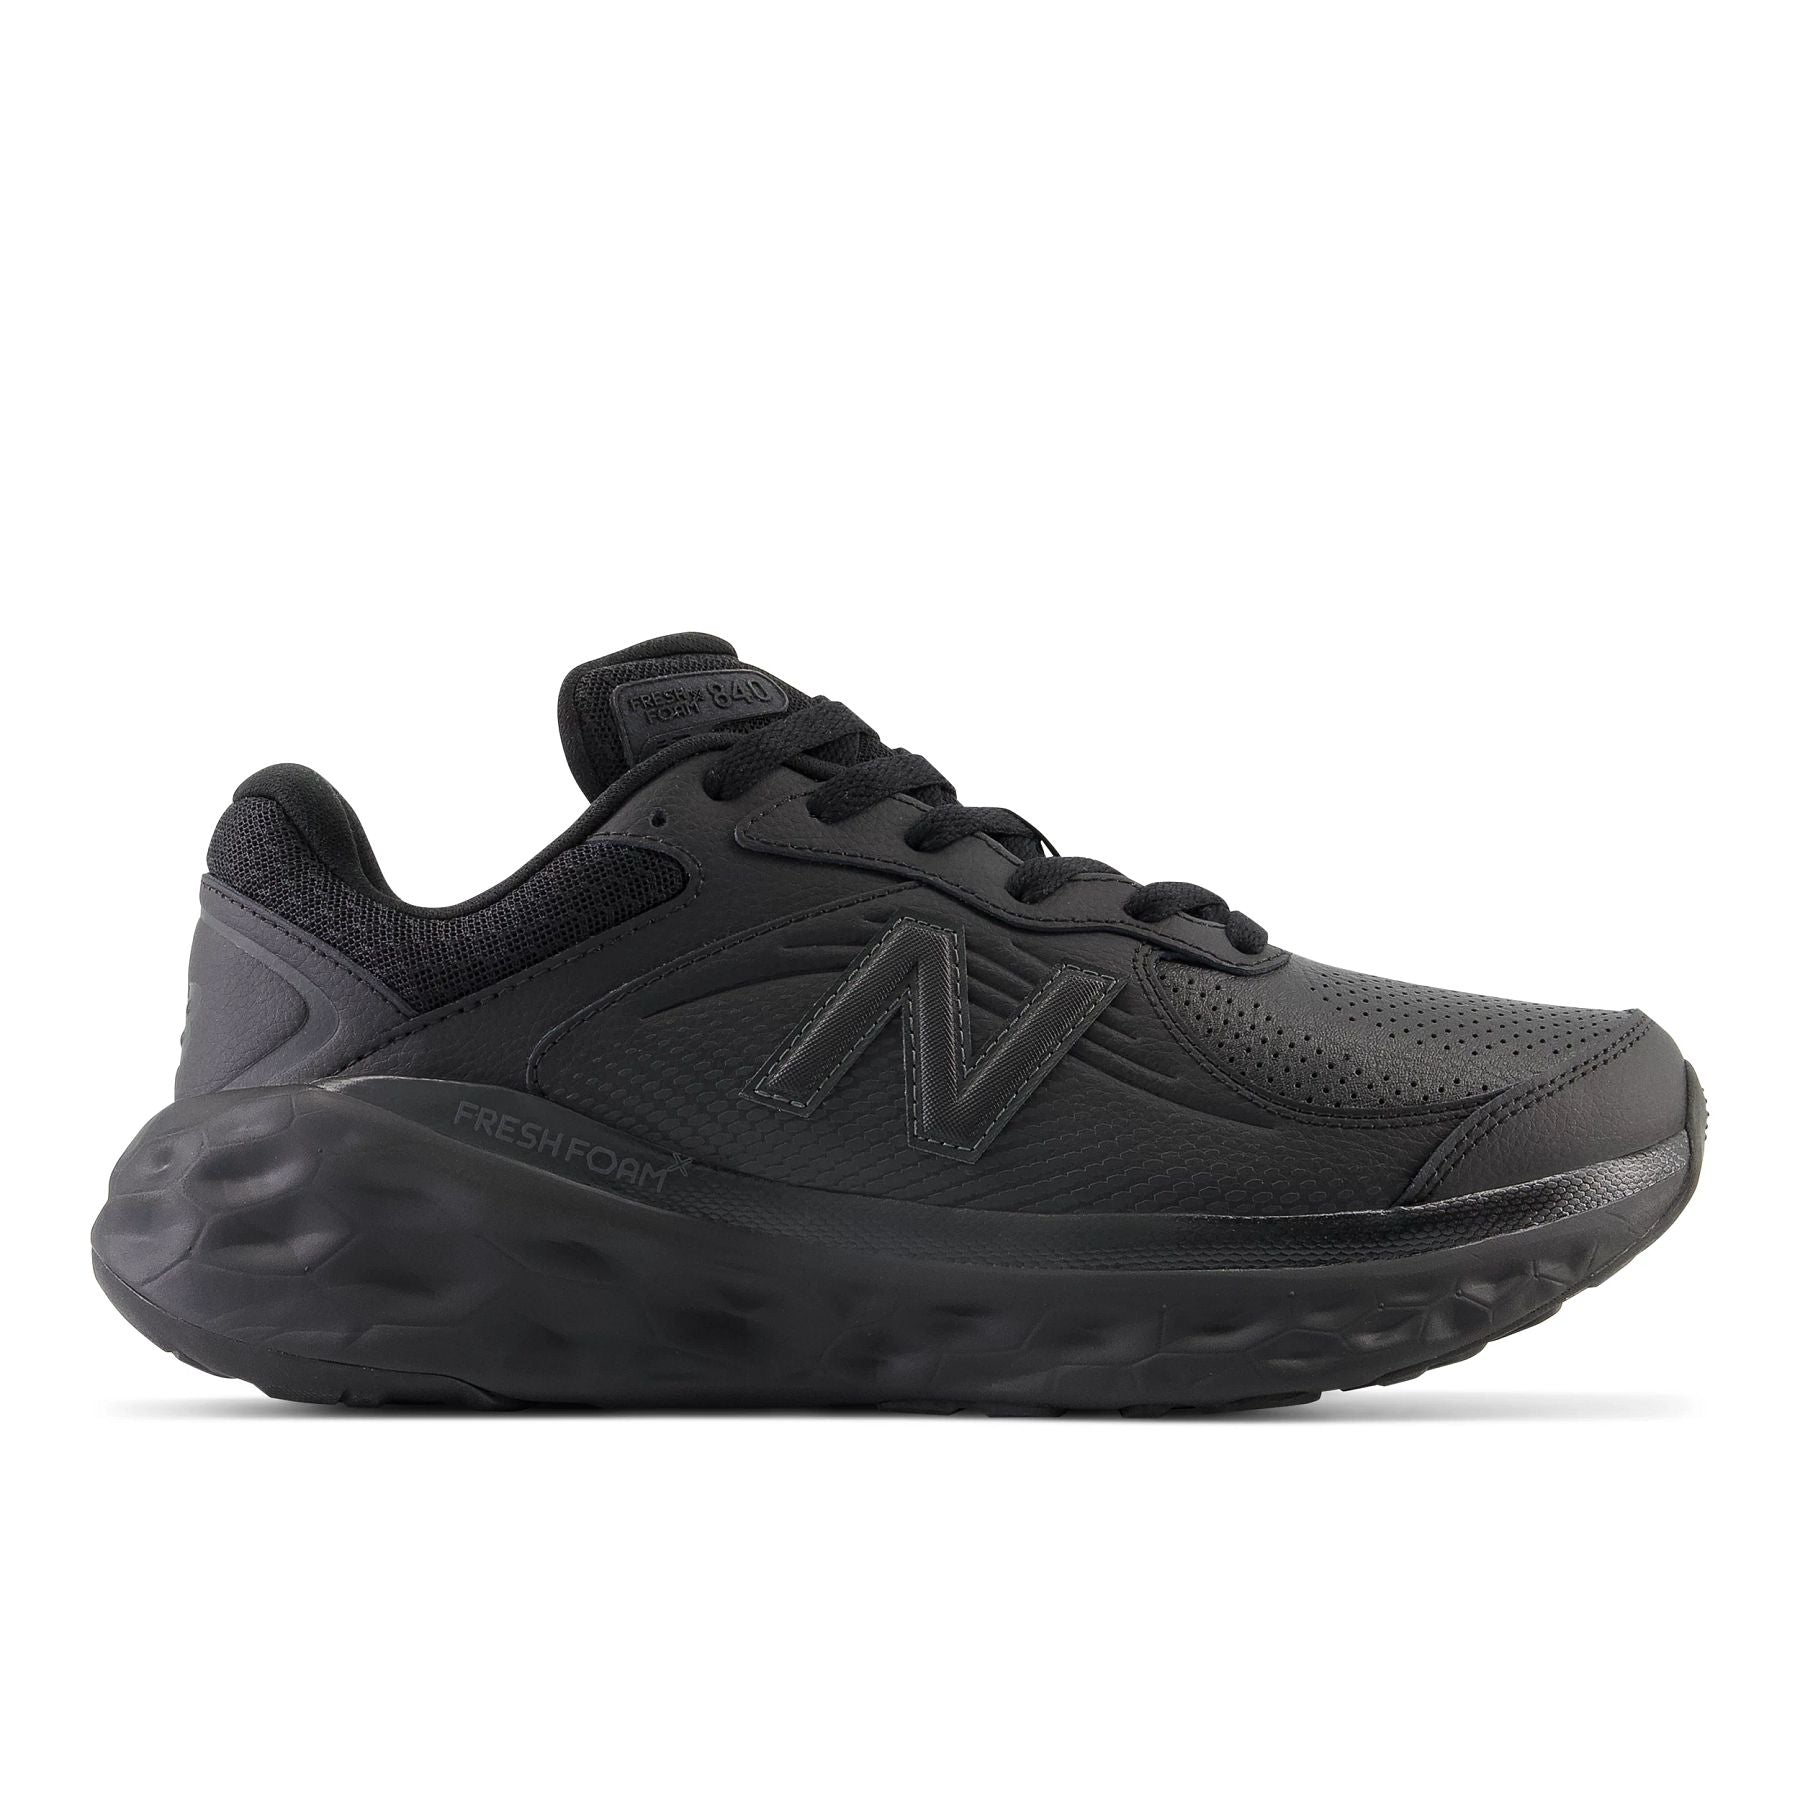 Lateral view of the Men's Leather New Balance MW840 Version 1 in Black/Blacktop